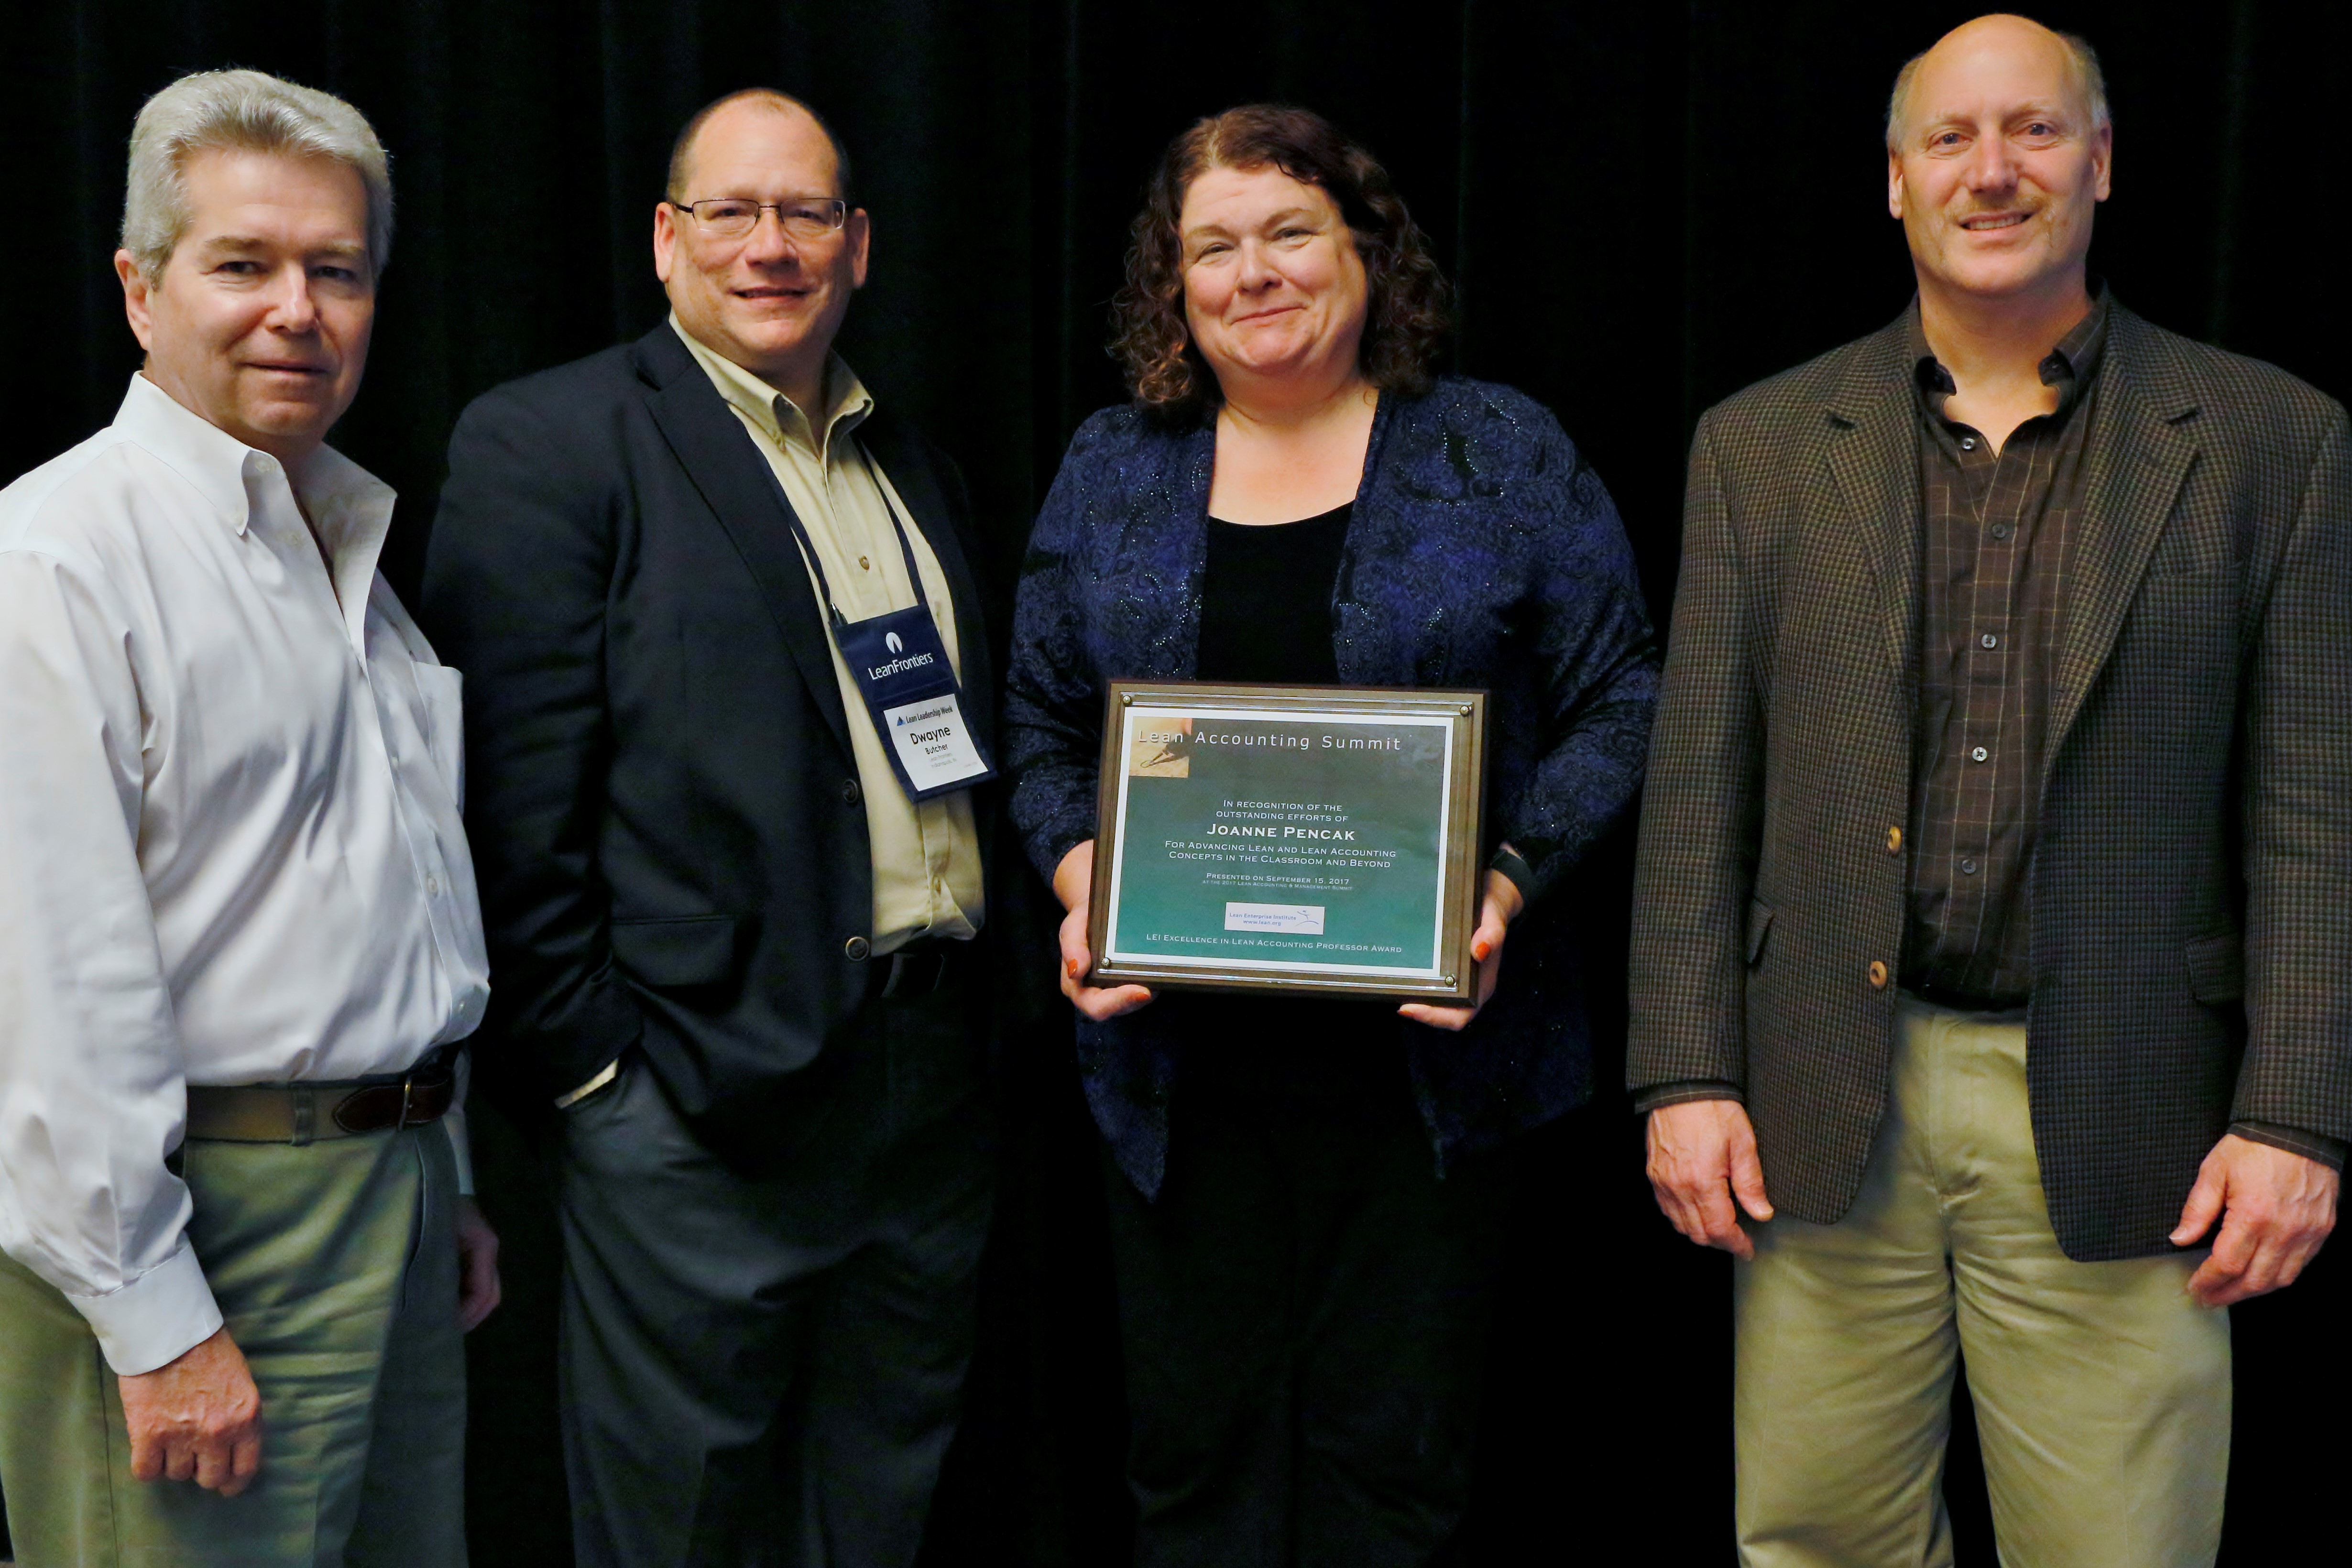 Joanne Pencak accepts the 2017 Excellence in Lean Accounting Award from, left to right: Chet Marchwinski, LEI communications director, Dwayne Butcher, Lean Frontiers vice president, and Jim Huntzinger